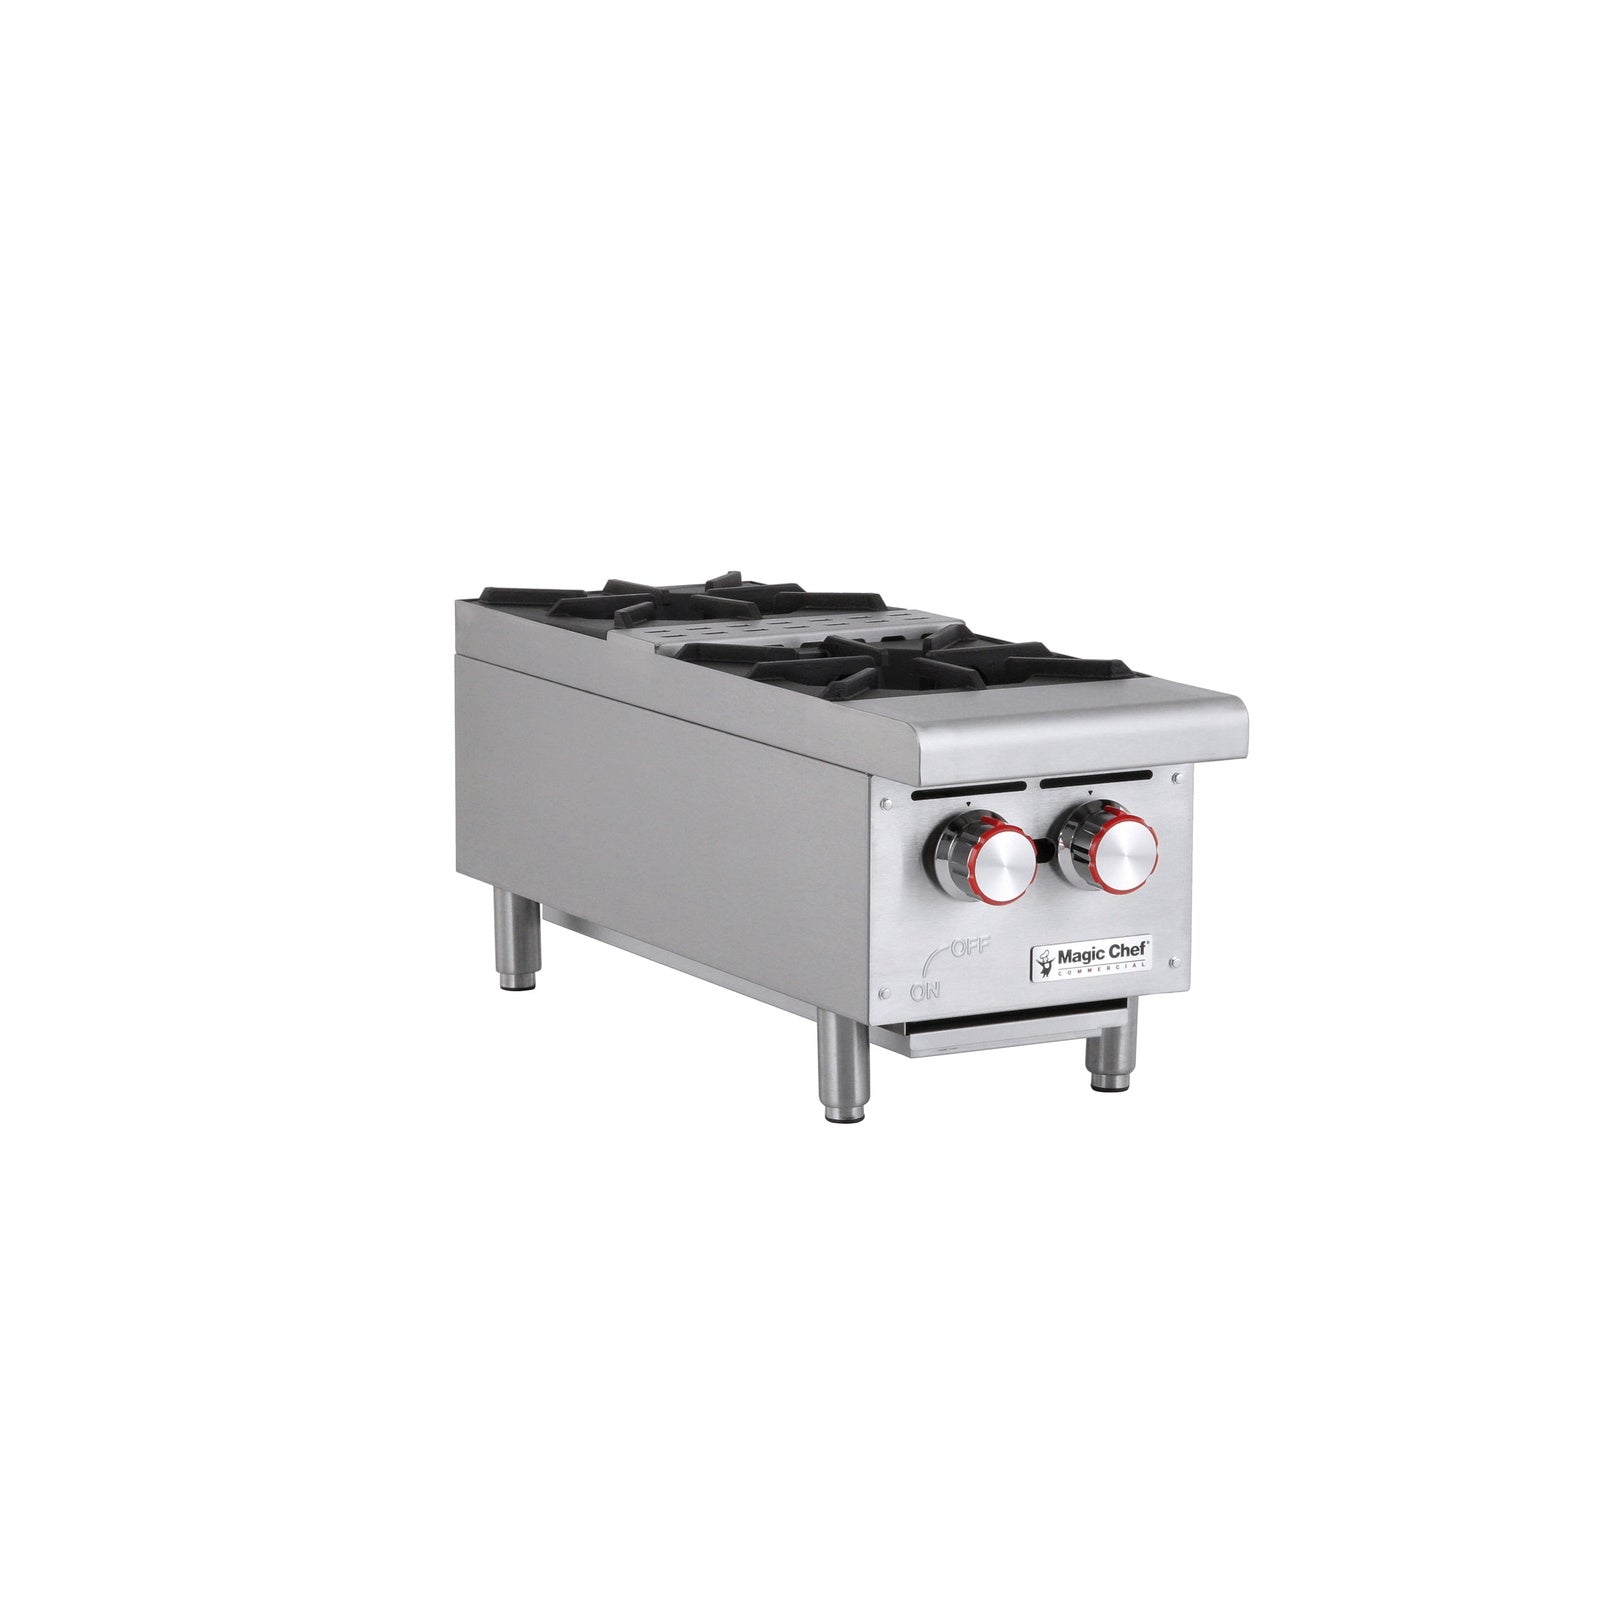 Magic Chef Commercial 12-inch. Hot Plate 2-Burner